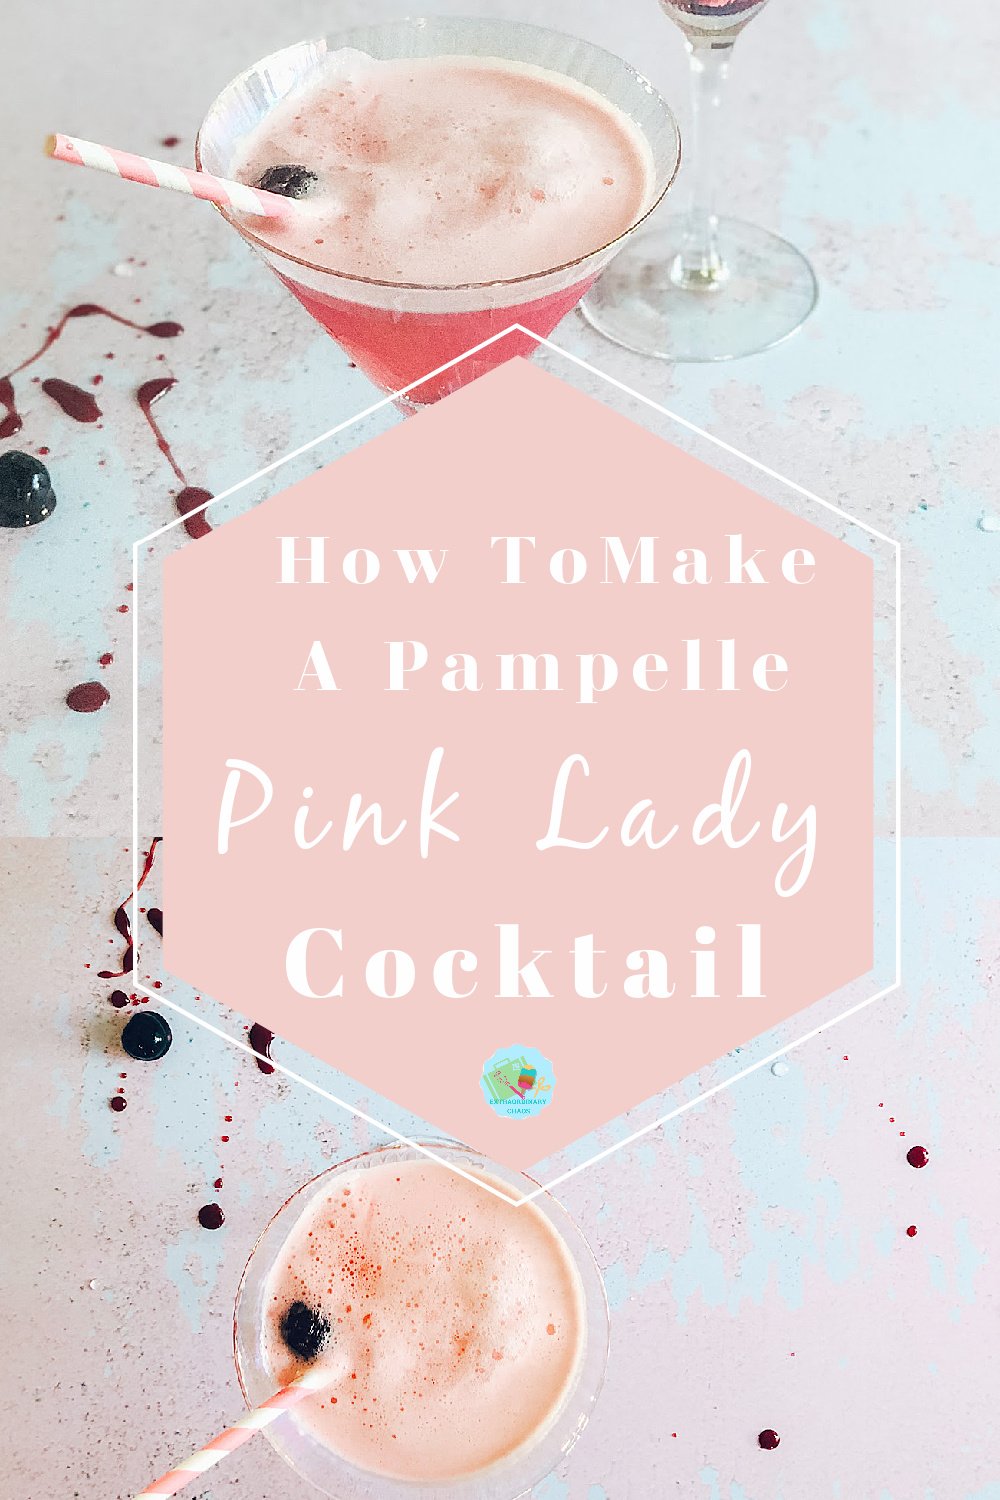 How to make a pink lady cocktail